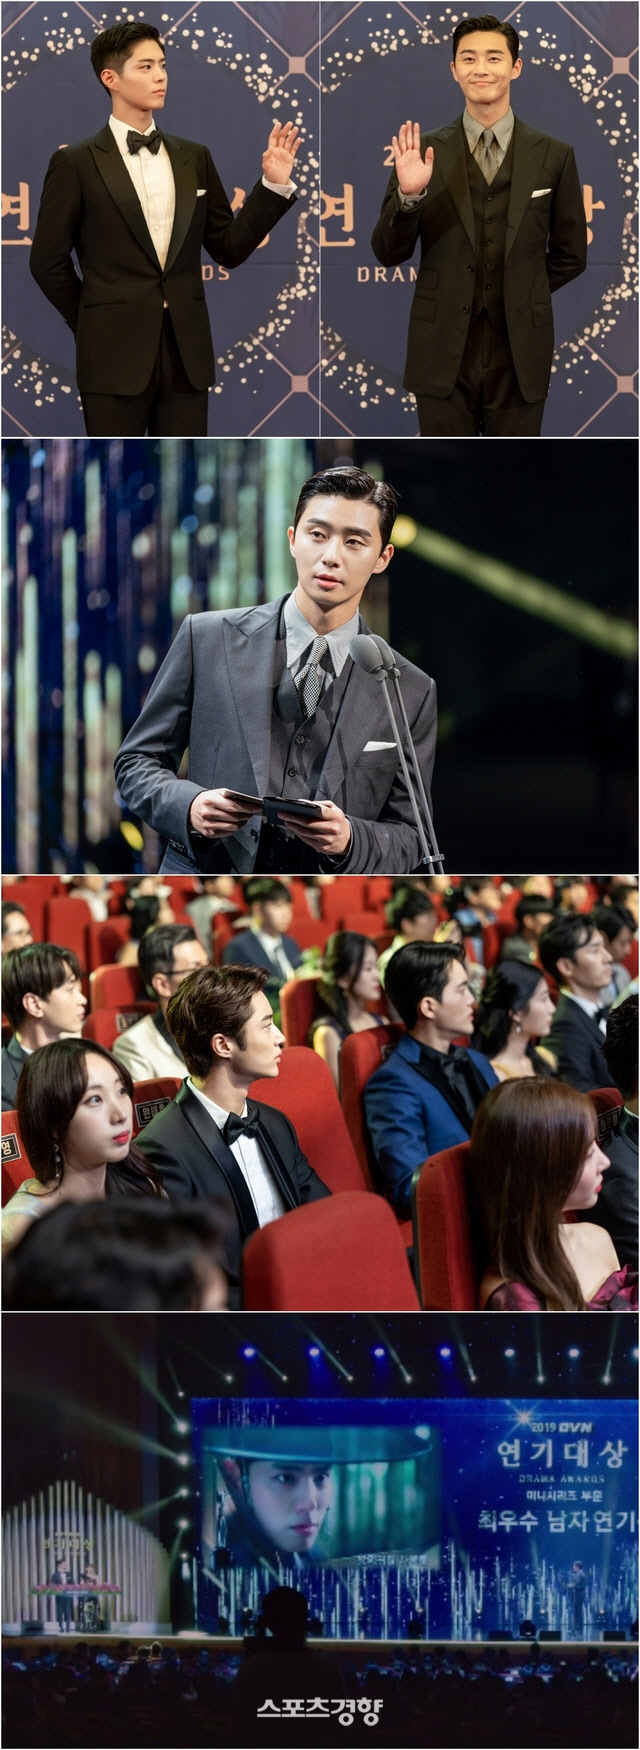 Youth records Park Bo-gum and Park Seo-joon met at Red Carpet.  TvNs Youth Records unveiled the spectacular year-end awards ceremony on May 5. In the spotlight, park Bo-gum, who is standing at The Red Carpet, and Park Seo-joon, who appears as his predecessor and top star Song Min-so, are also excited. Earlier, Sahye-jun was a rising star by appearing in the medical drama Gateway with top star Lee Hyun-so (Hyun-jin Seo) despite the ploy of his former company, Lee Tae-soo (Lee Chang-hoon).  The romance between Sahye-jun and Seung-ha (Park So-dam) who pledged constant love in the midst of a busy life added excitement. In the photos released on the day, sahye-jun and Song Min-so attended the ceremony for the acting awards ceremony.  It is also interesting to see the tense expressions of Won Hae-hyo (Woo Woo-suk) and Park Do-ha (Kim Kun-woo) waiting for the best male actor award to be announced. The production team begins the era of Sahye-jun.  Park Seo-joon in particular makes a special appearance and the second act is hotter.  We look forward to his performance, which will add to the power of disassembly with top star Song Min-so, who has a special relationship with Sahye-jun.